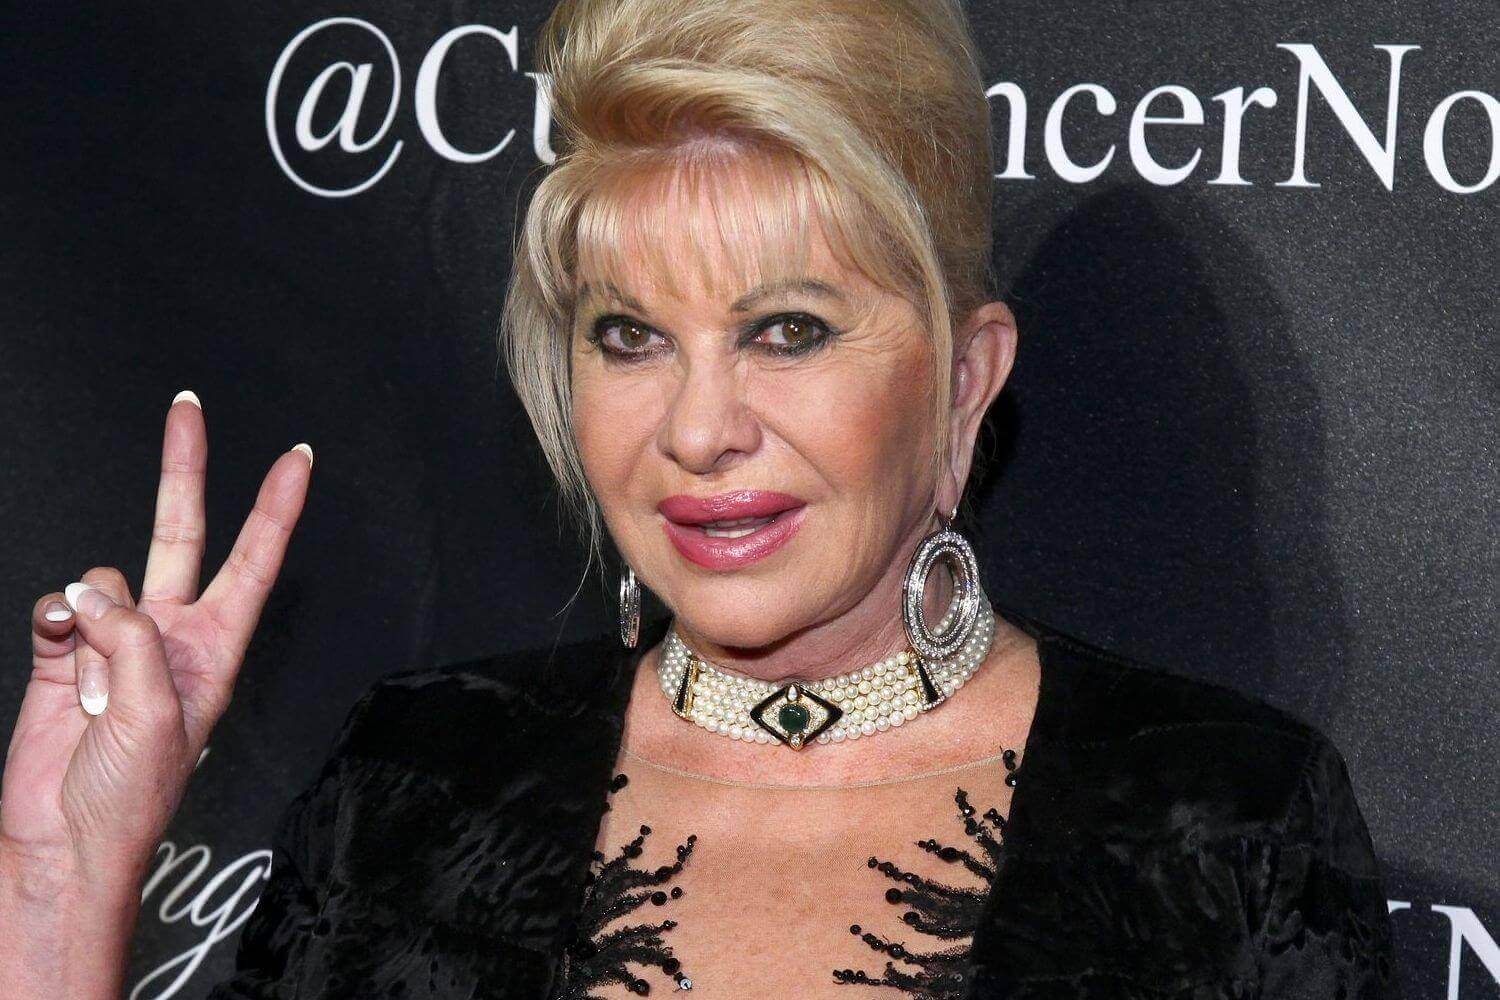 Ivana Trump, the first wife of Donald Trump, dies at the age of 73